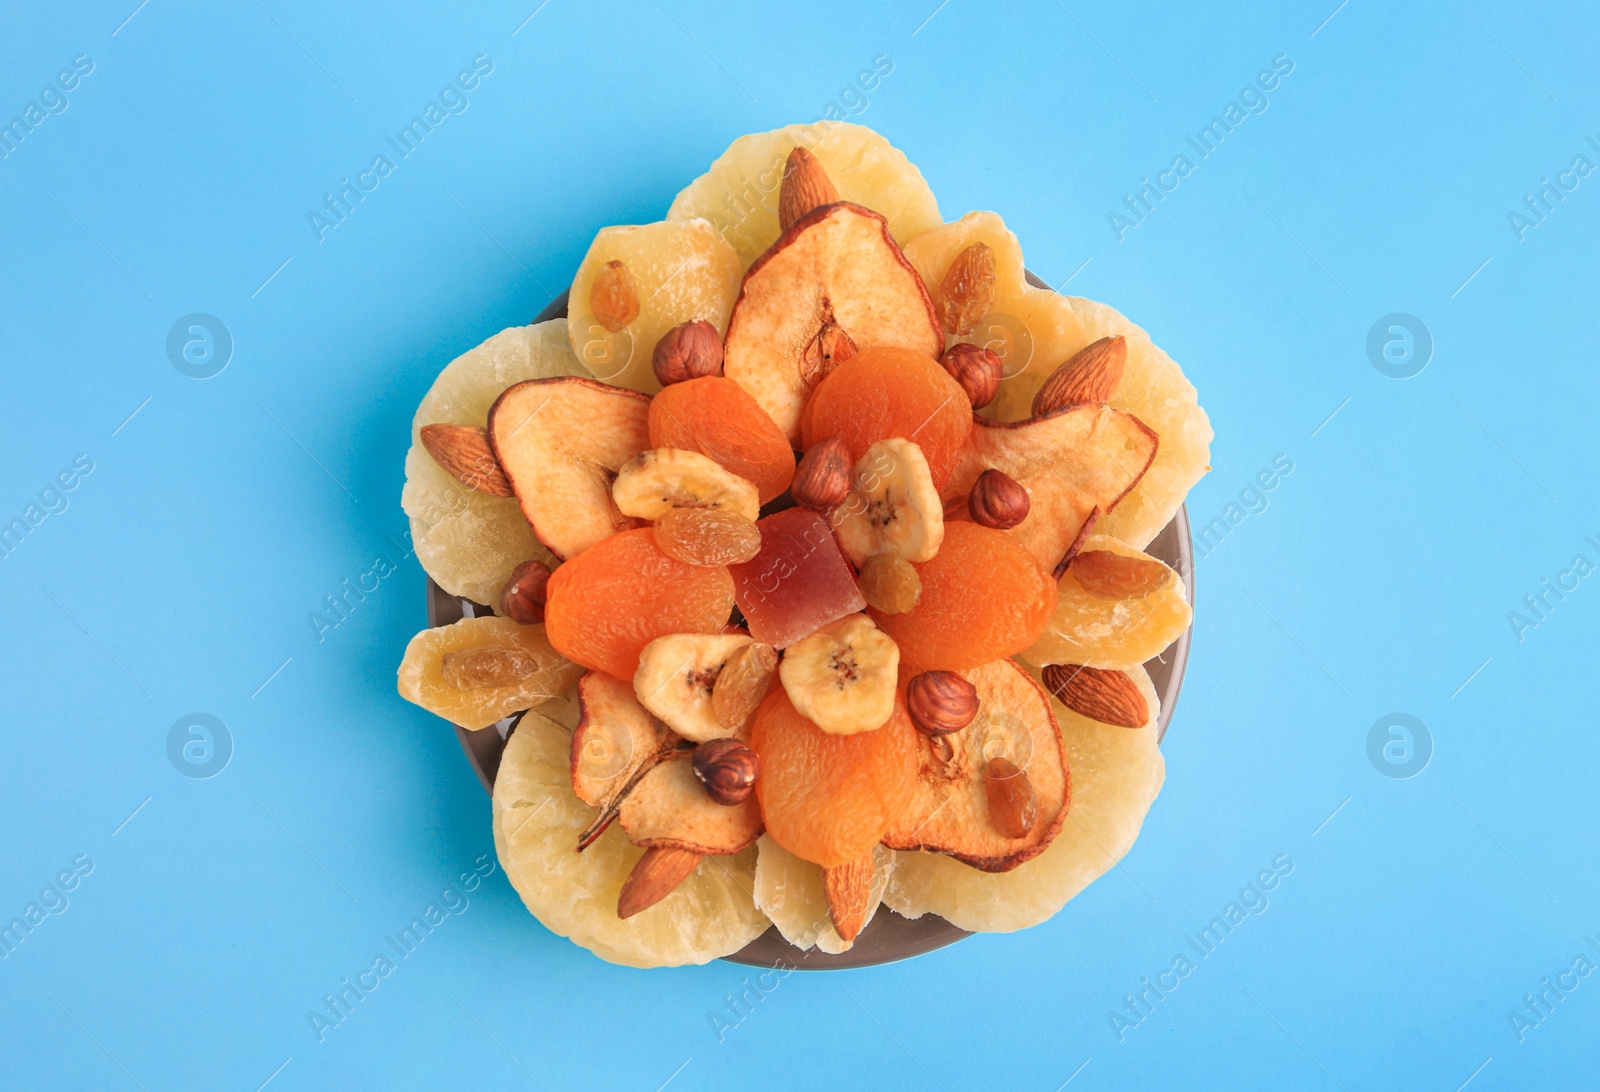 Photo of Mixed dried fruits and nuts on light blue background, top view